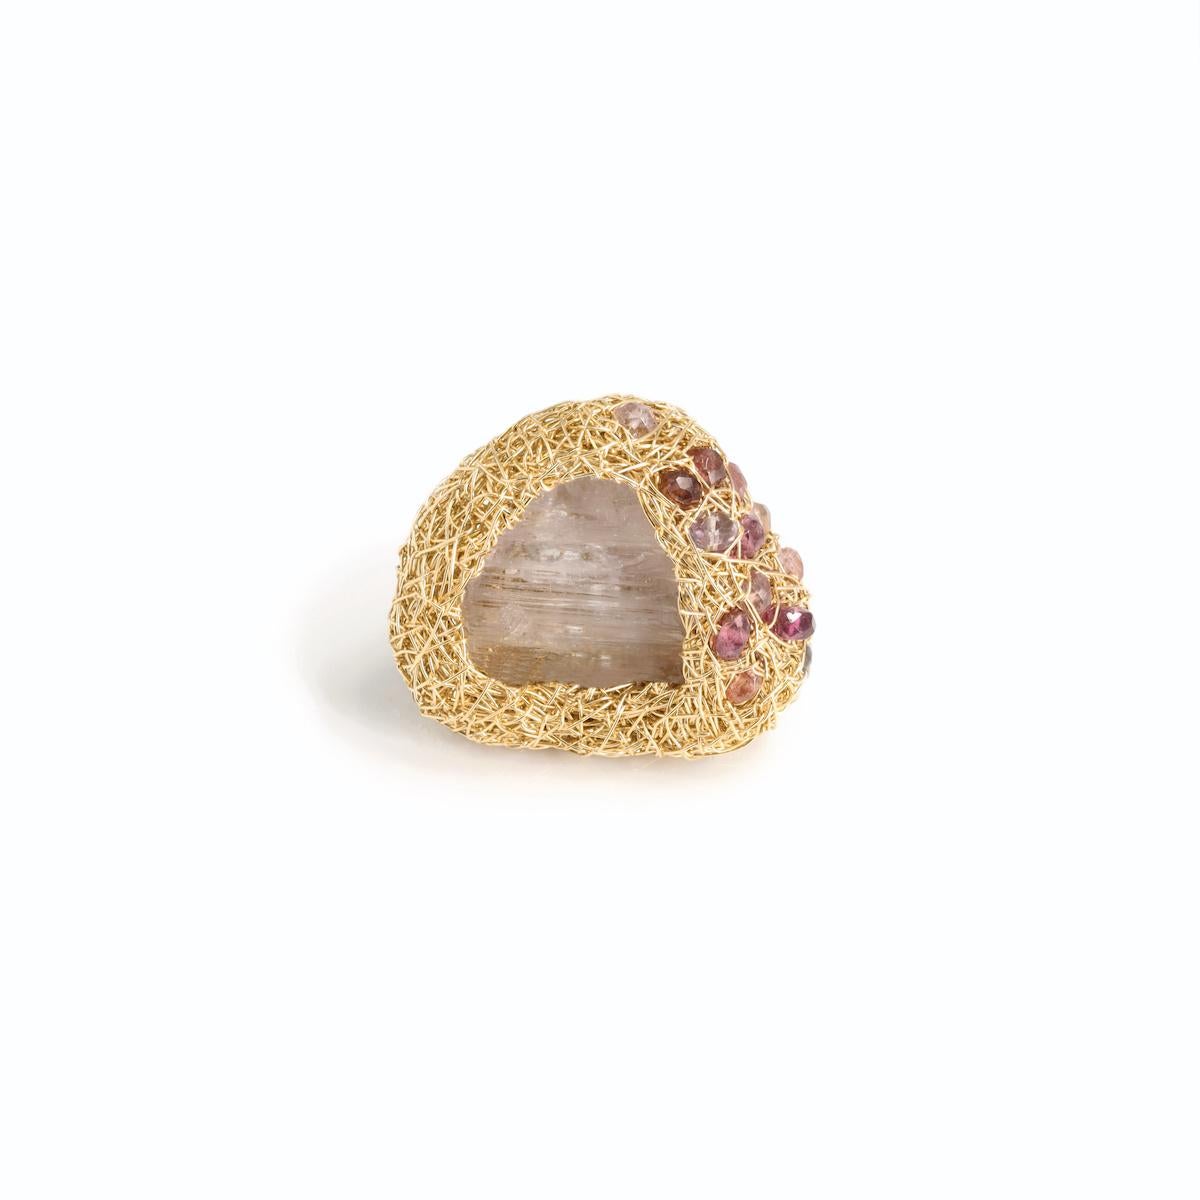 Tourmaline & Kunzite One-Off Cocktail Ring in 14 K Yellow Gold F. by the Artist For Sale 2